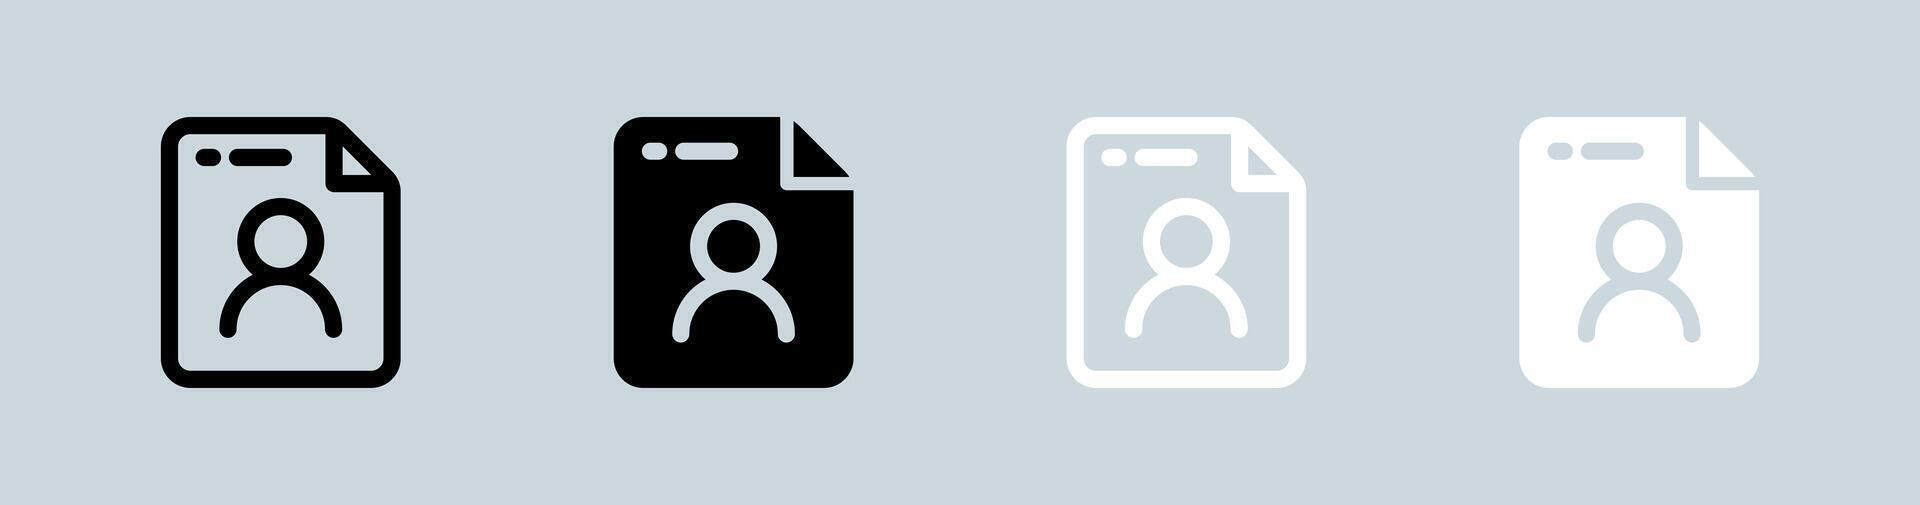 Personal data icon set in black and white. Privacy signs vector illustration.